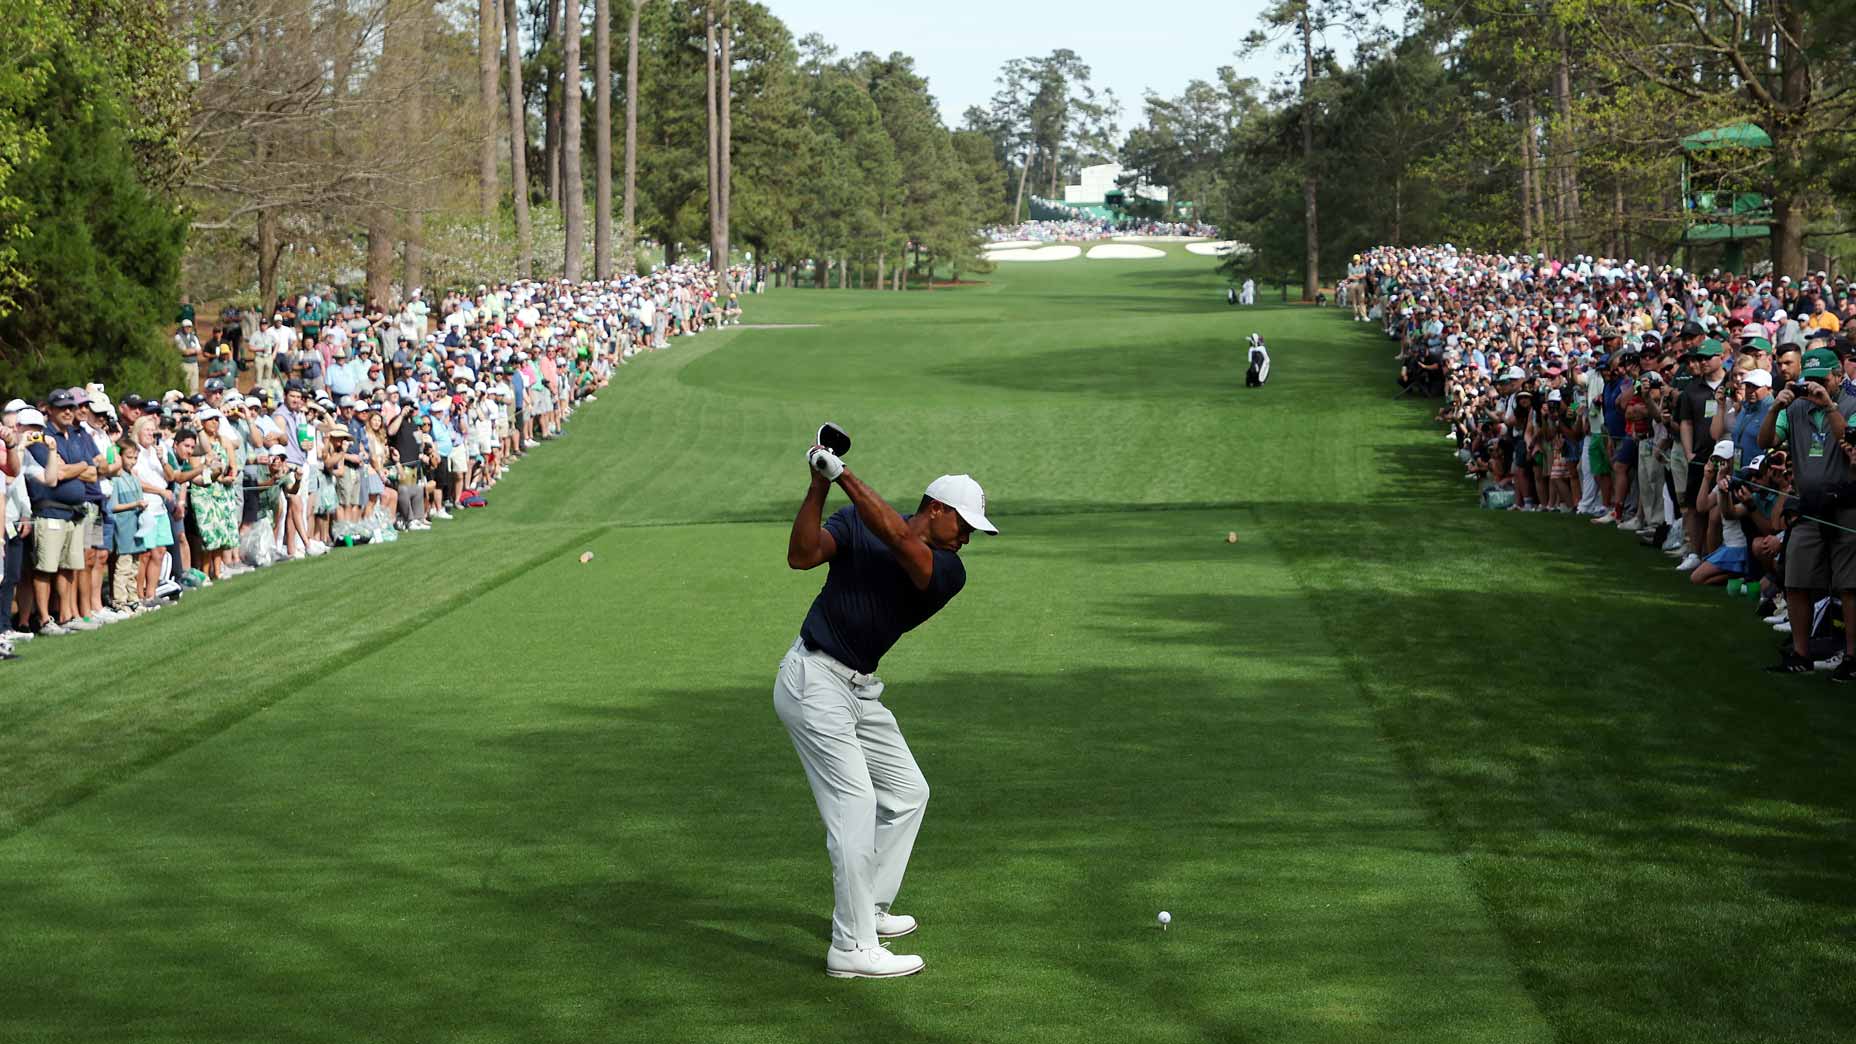 Watch the Masters: What channel is the Masters on?